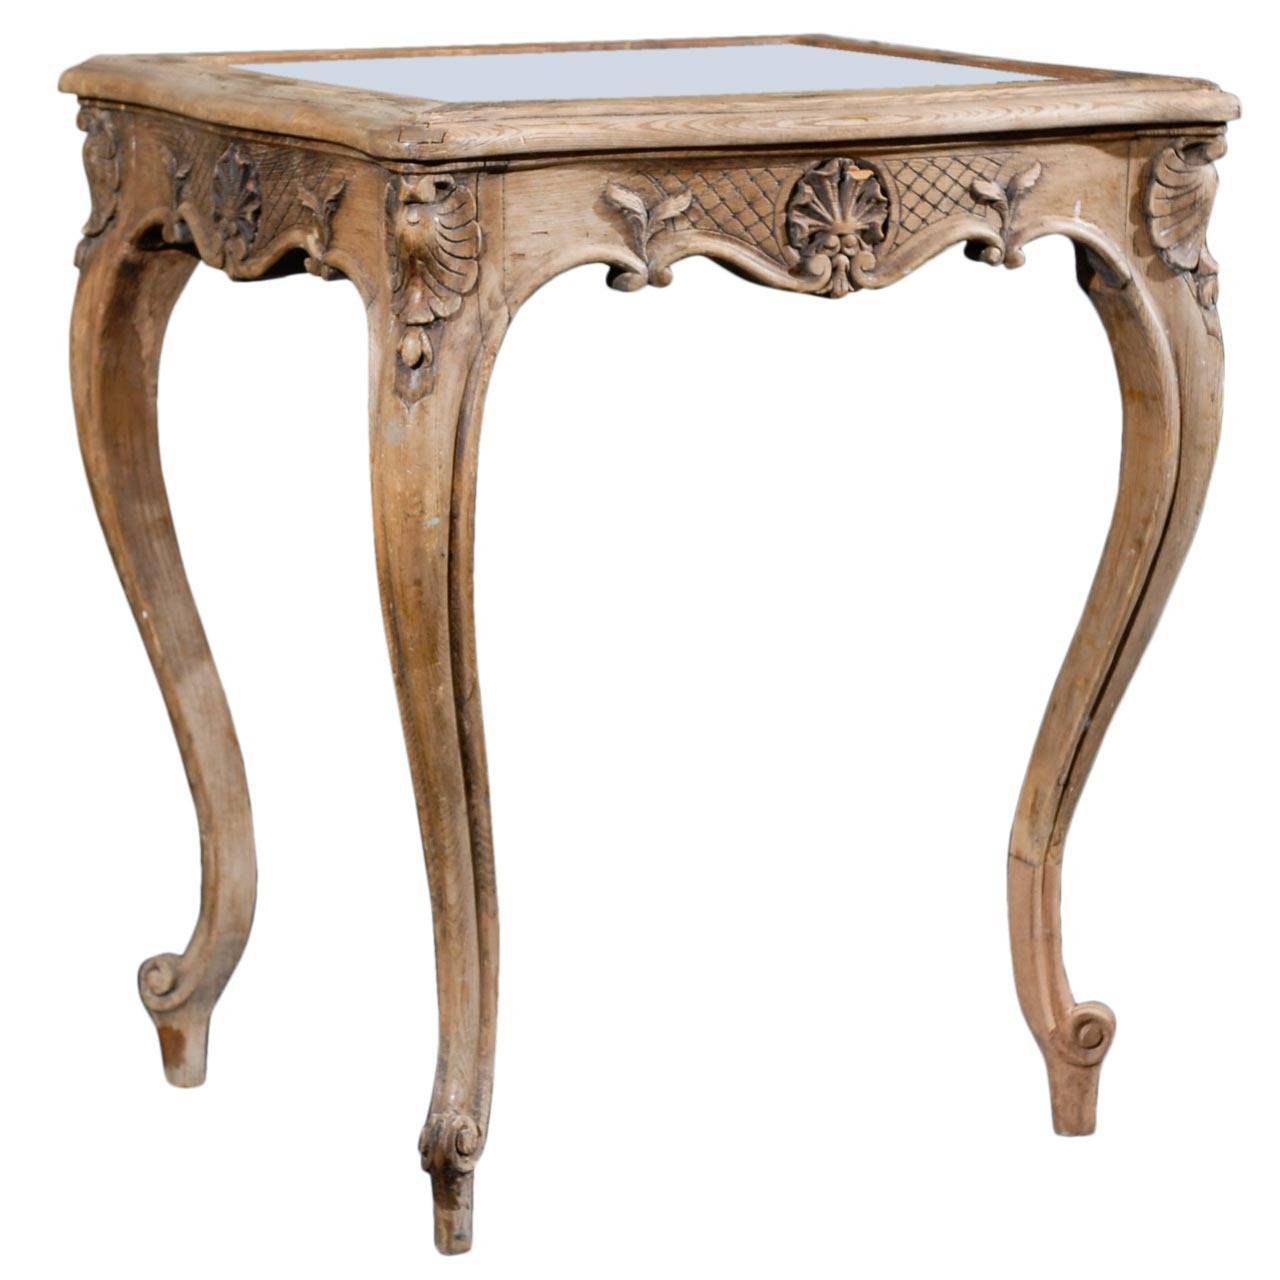 A gorgeous 19th century French wooden side/drinks table with mirrored top and scrolled cabriole legs. This cute French side/drinks table has nice leaf motif, scolls and cross hatched carvings throughout its apron. This piece is an overall light